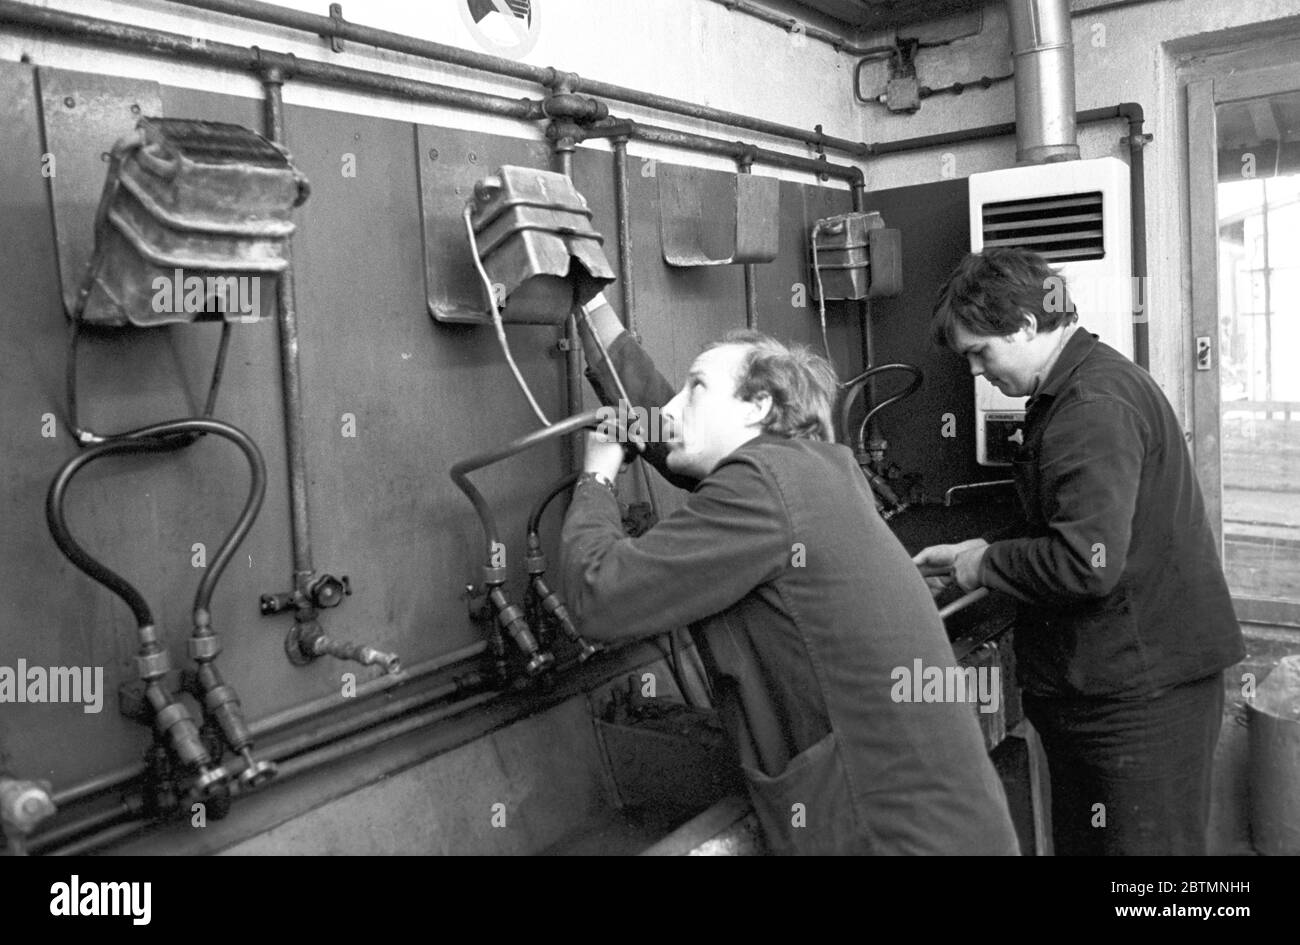 30 November 1984, Saxony, Delitzsch: Water boilers from water heaters are repaired by skilled workers at PGH Ausbau Delitzsch in the mid-1980s. Hot water was produced in numerous apartments using these devices. Exact date of recording not known. Photo: Volkmar Heinz/dpa-Zentralbild/ZB Stock Photo